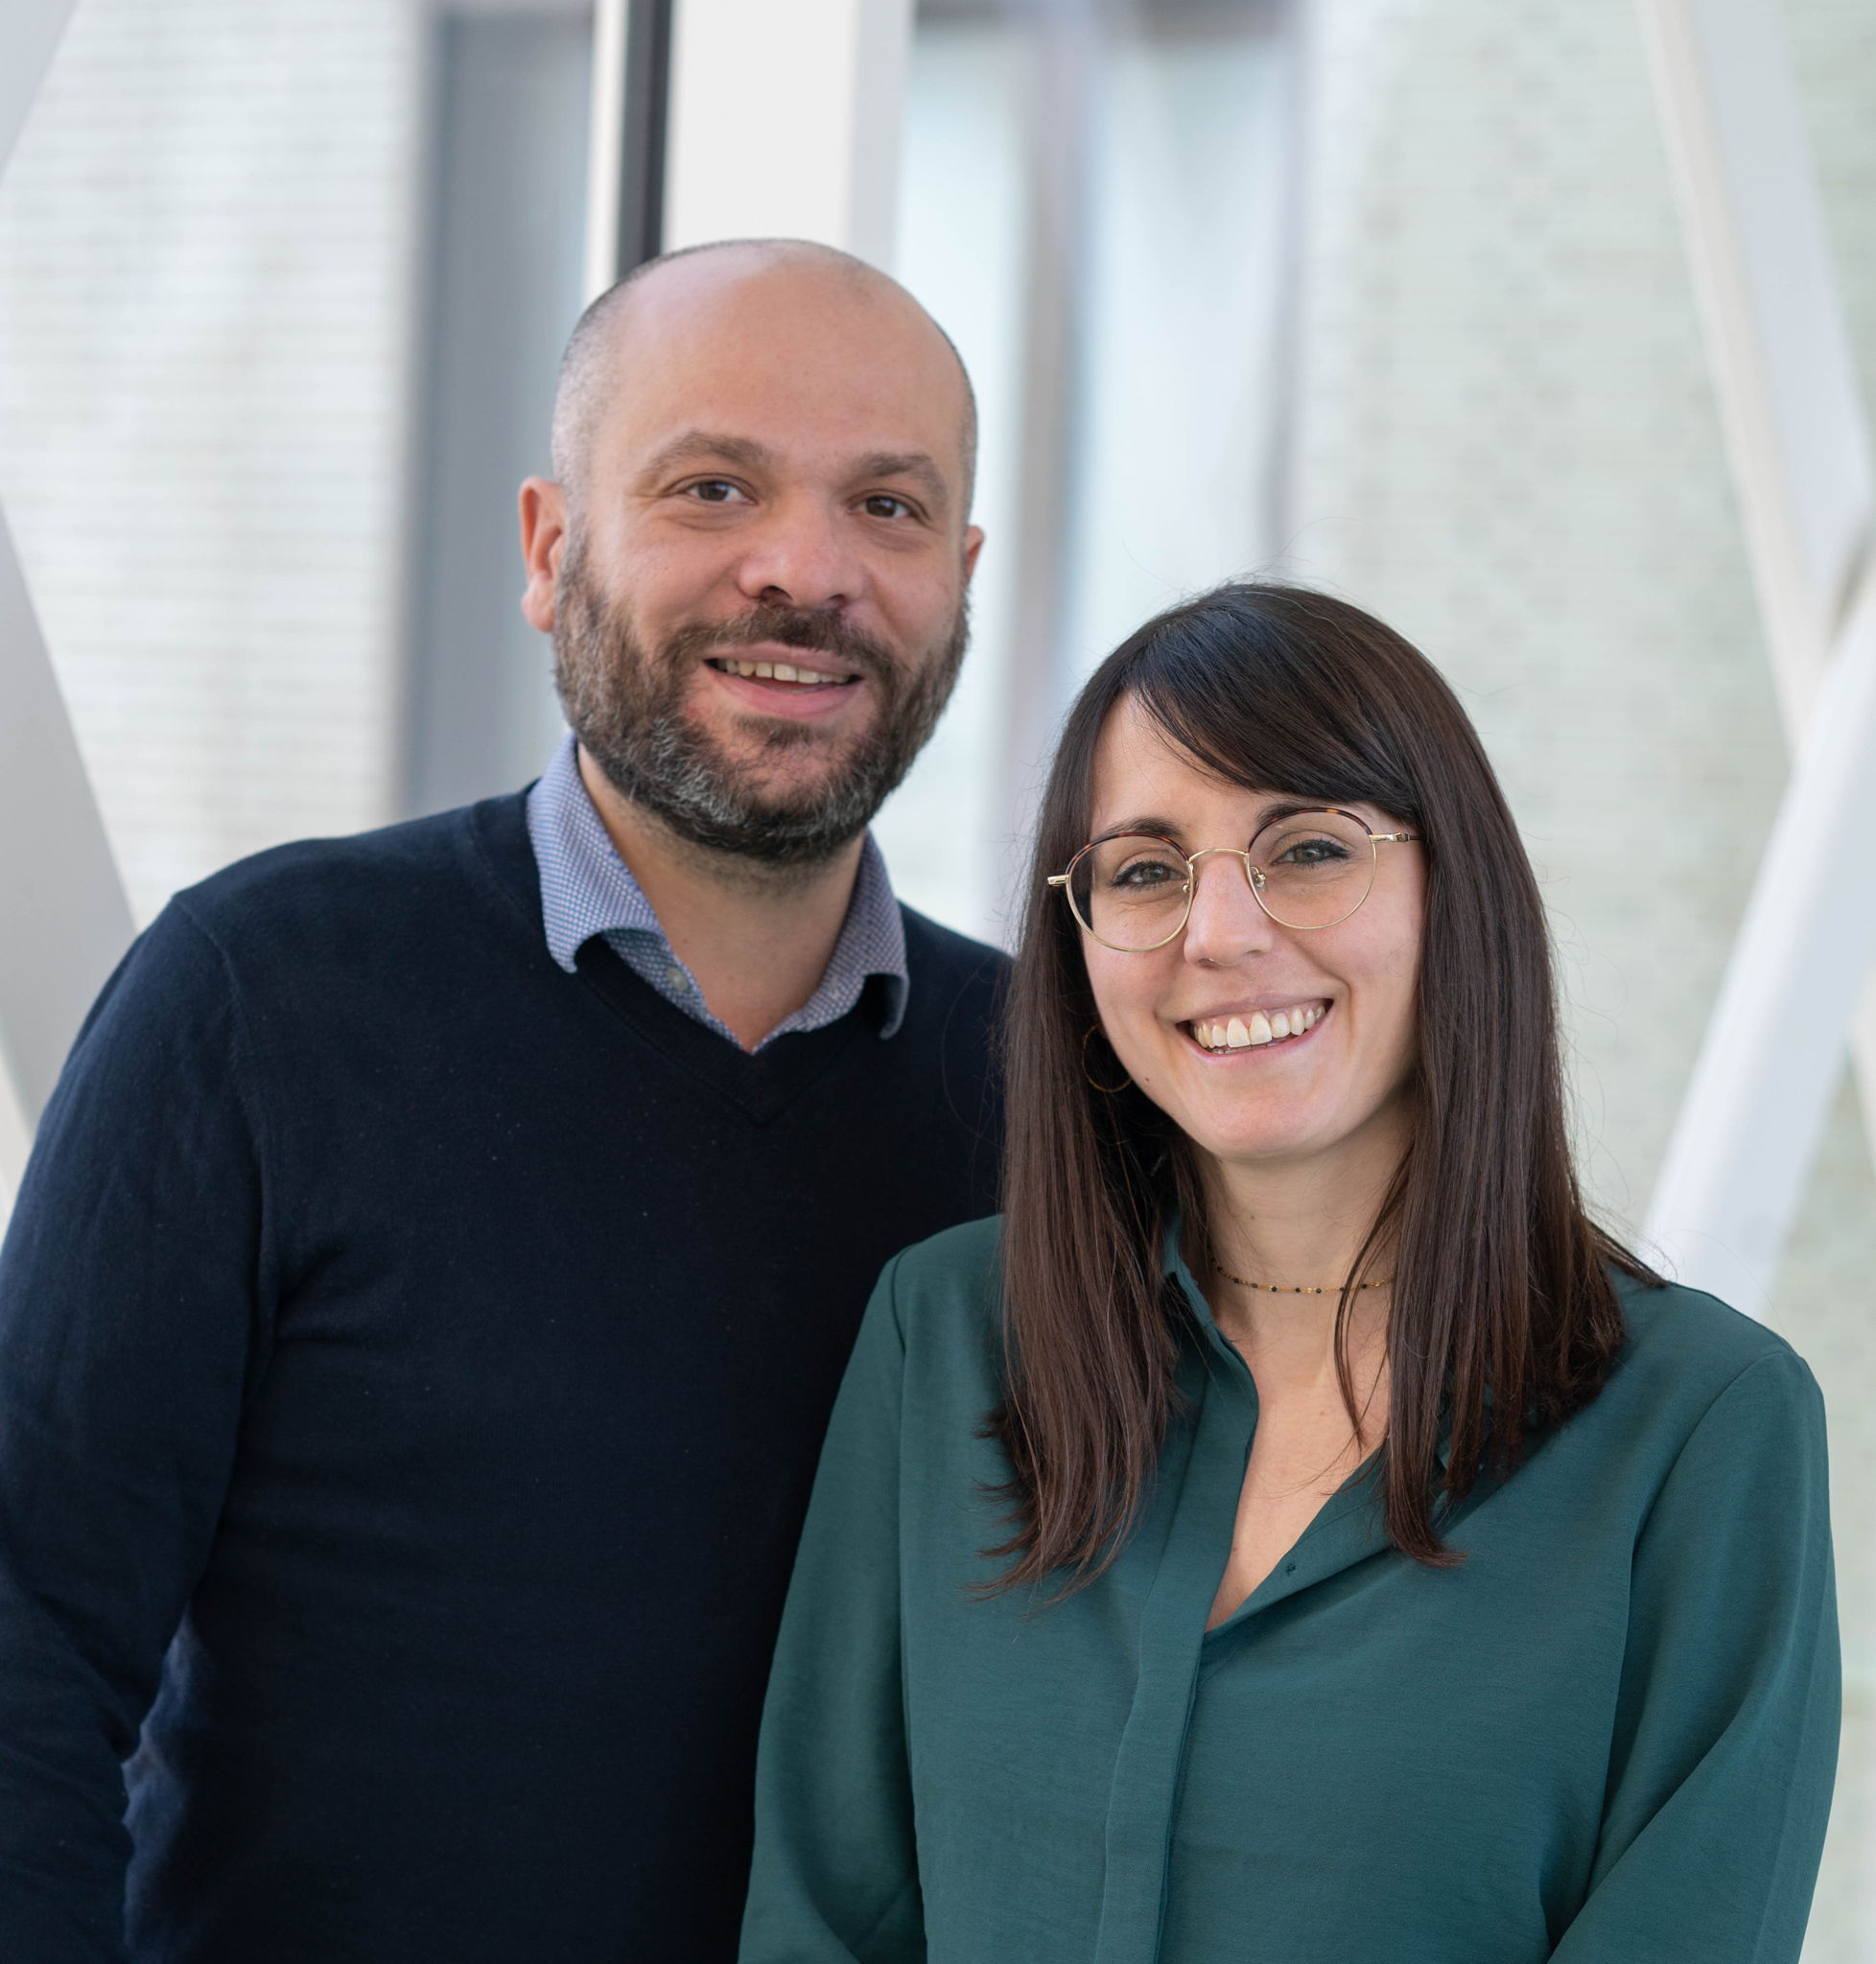 Prof. Max Mazzone (left) and the article’s first author Carla Riera-Domingo (right).